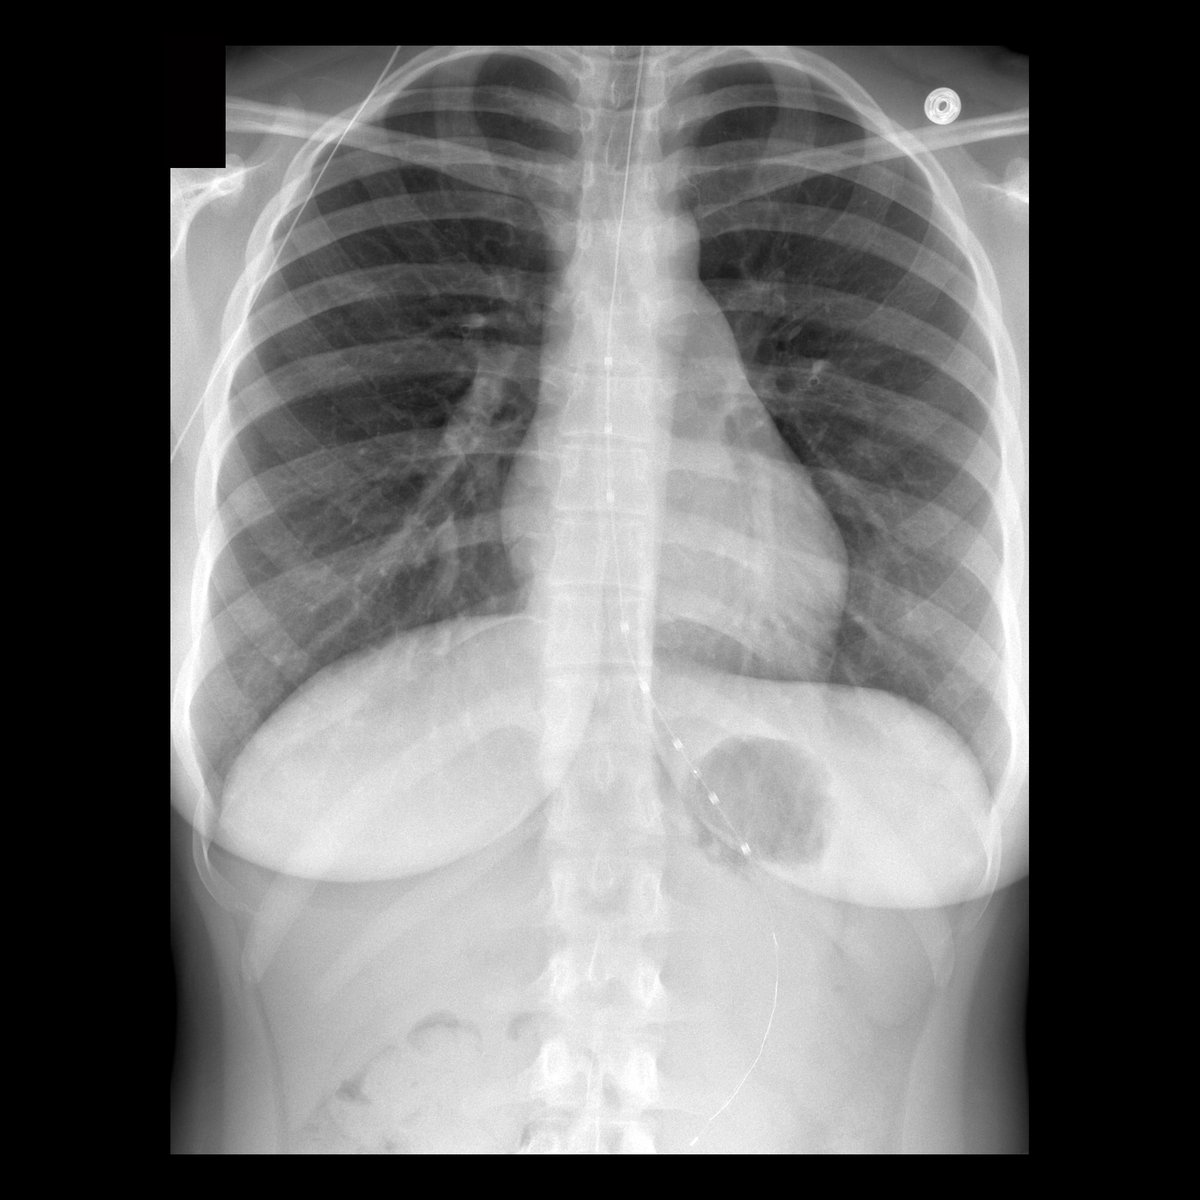 Teen with heartburn

CXR shows an esophageal pH probe. Position of esophageal pH probe sensor/measurement lead (the radiolucent cylinder with radiopaque dot in center of it) is at gastroesophageal junction. 

#FOAMed #MedEd #FOAMPed #FOAMRad #PedsRad #RadEd #RadRes #radiology